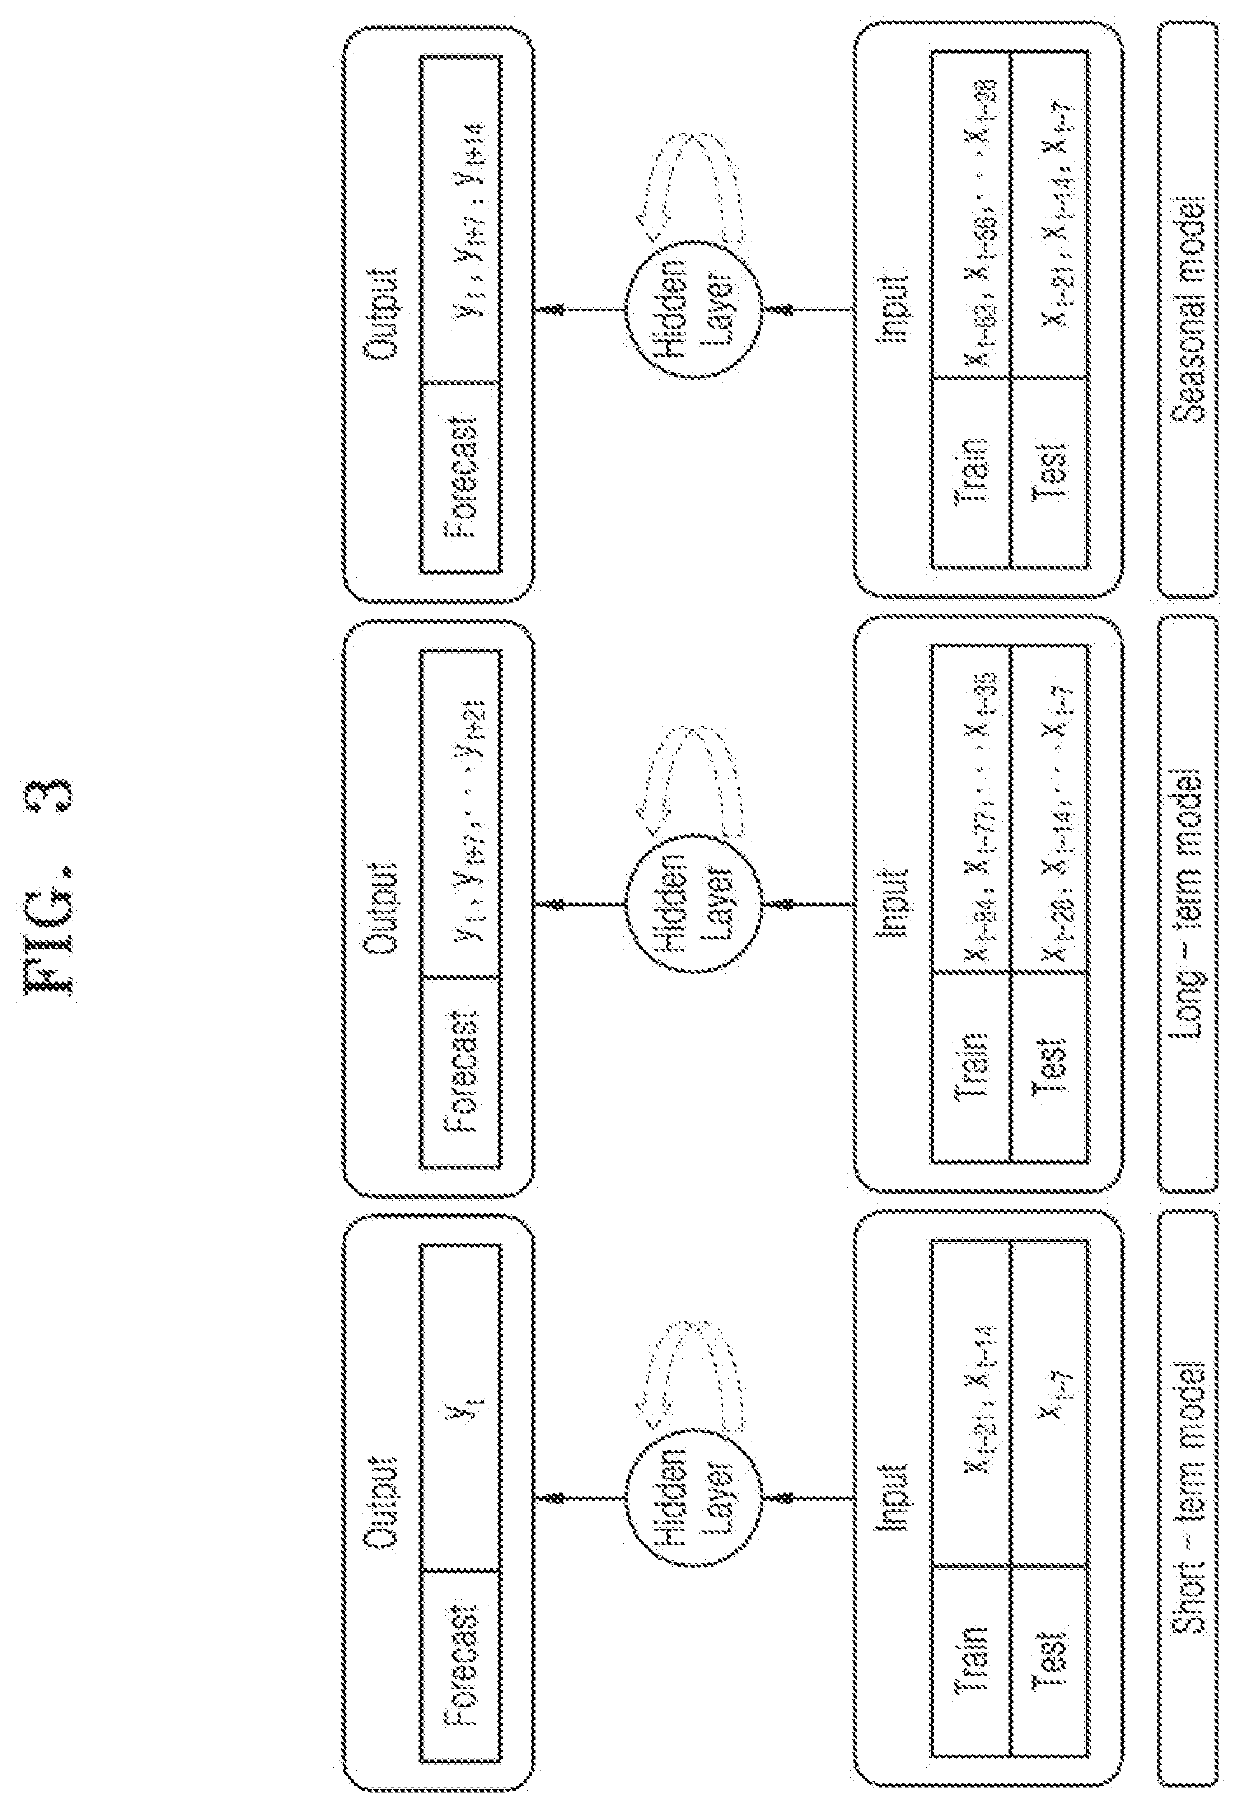 Method and apparatus for forecasting power demand